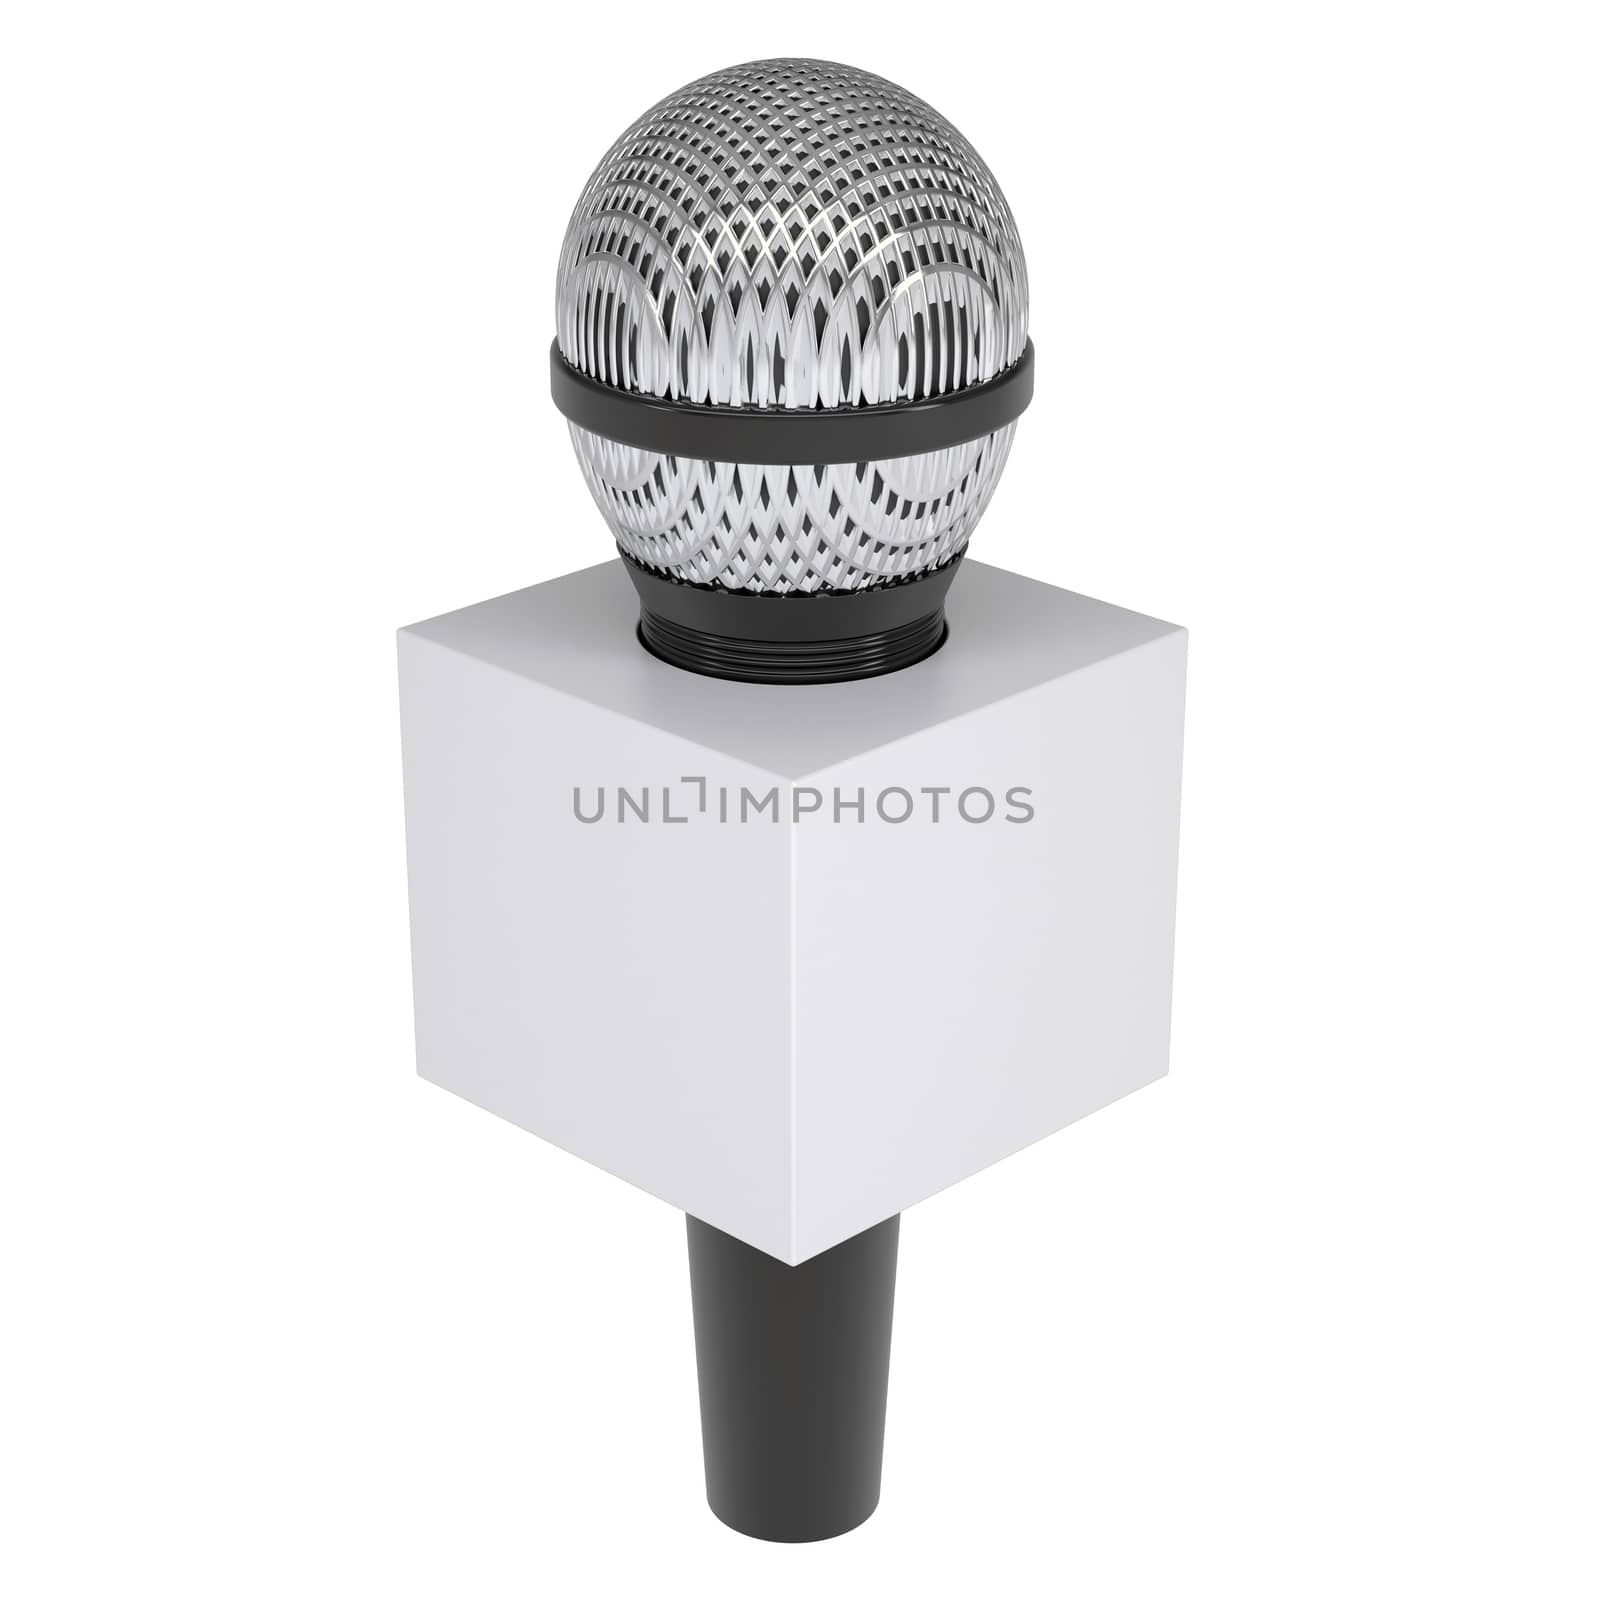 A television microphone with blank advertising cube. Isolated render on a white background